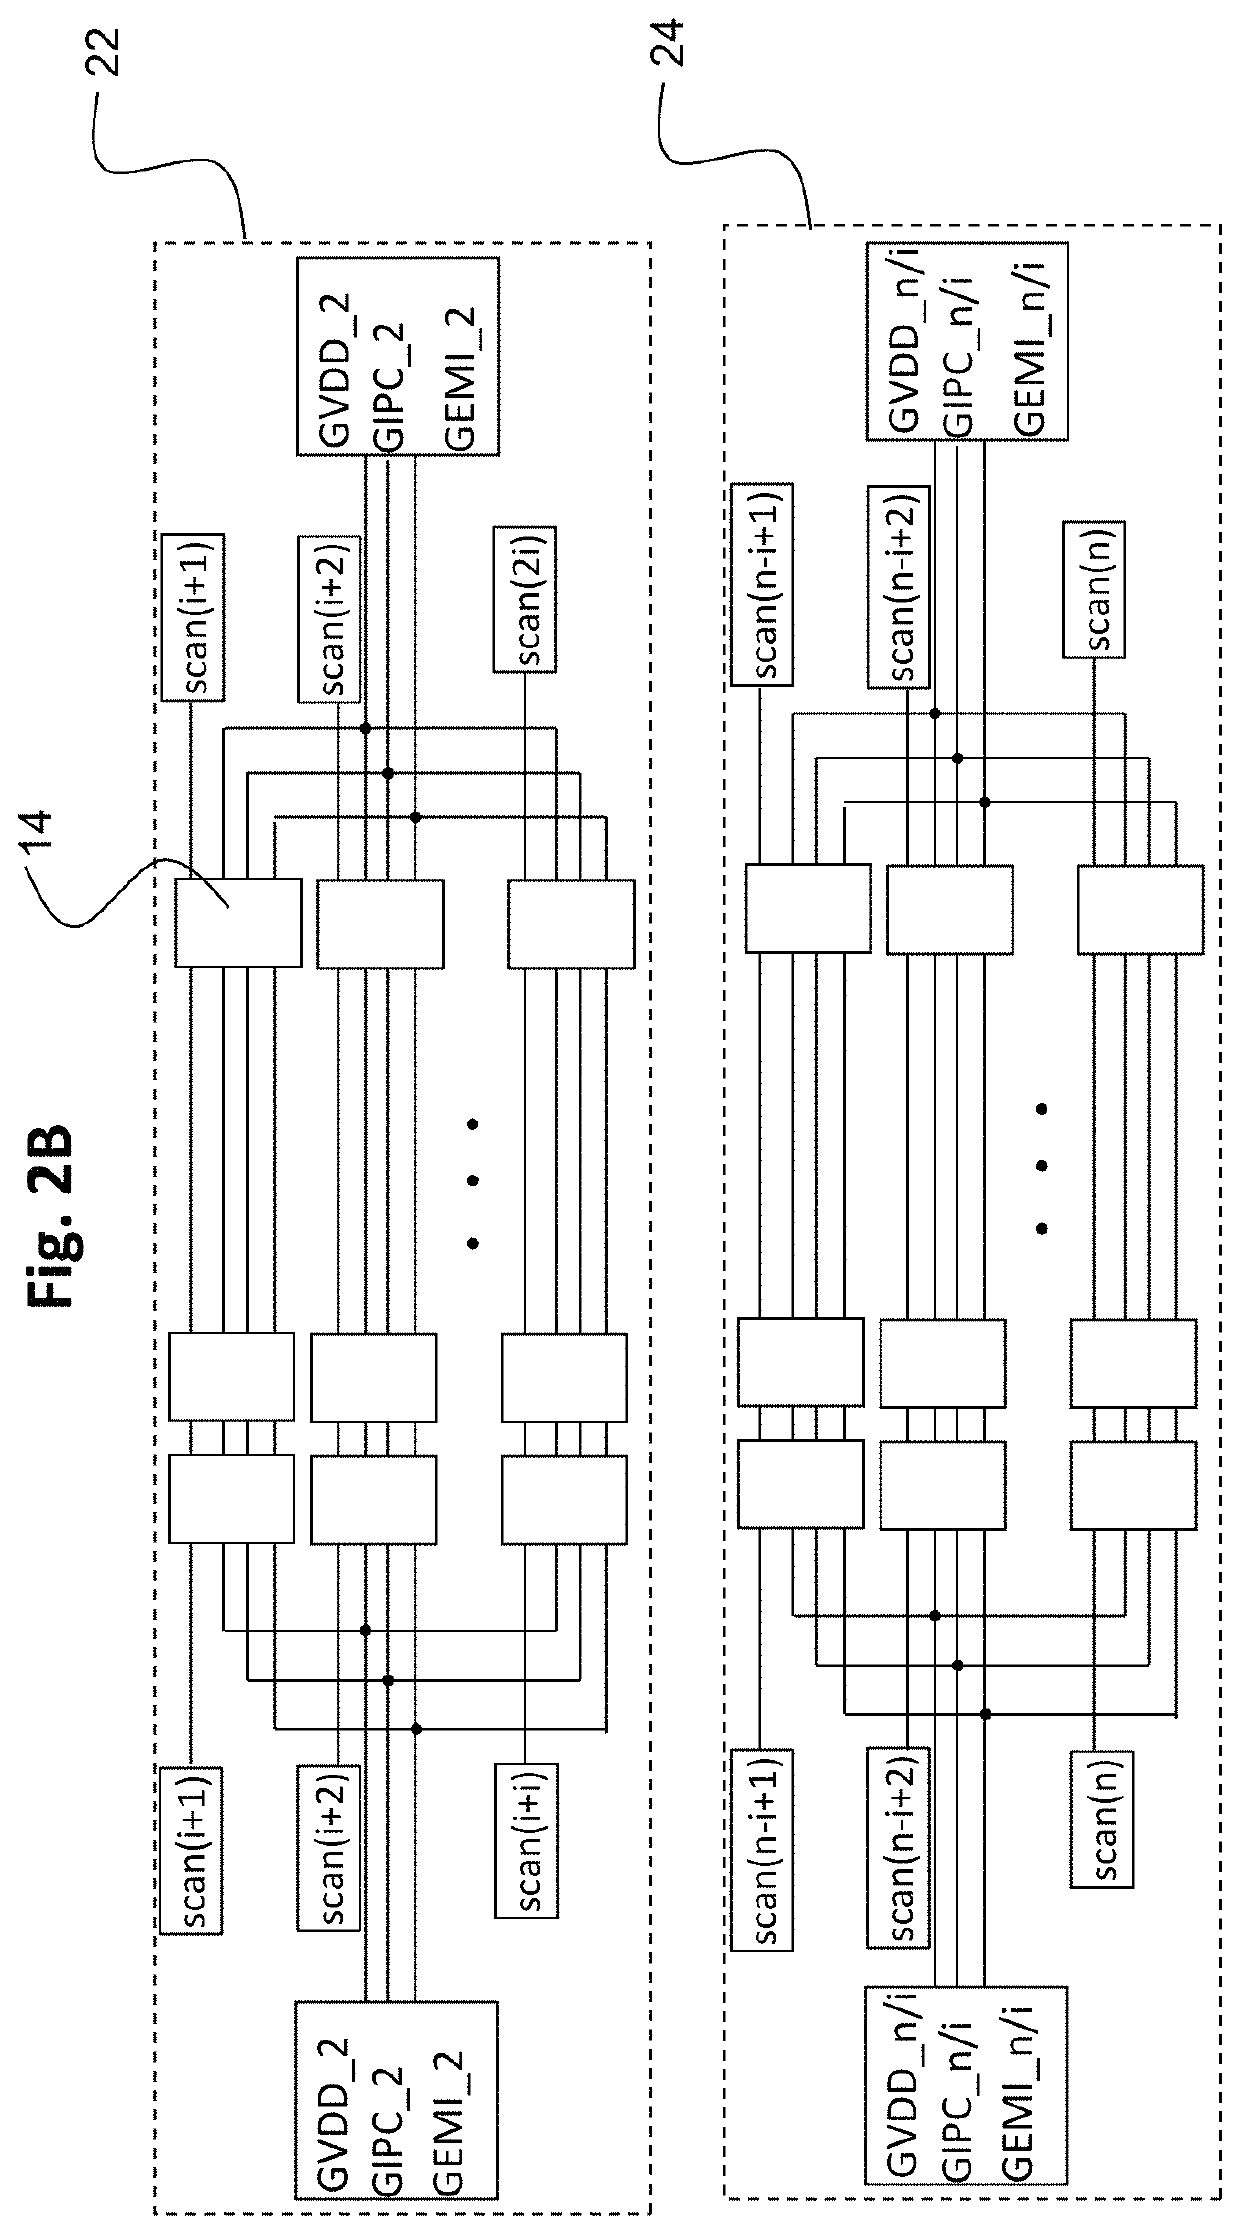 TFT pixel threshold voltage compensation circuit with short data programming time and low frame rate